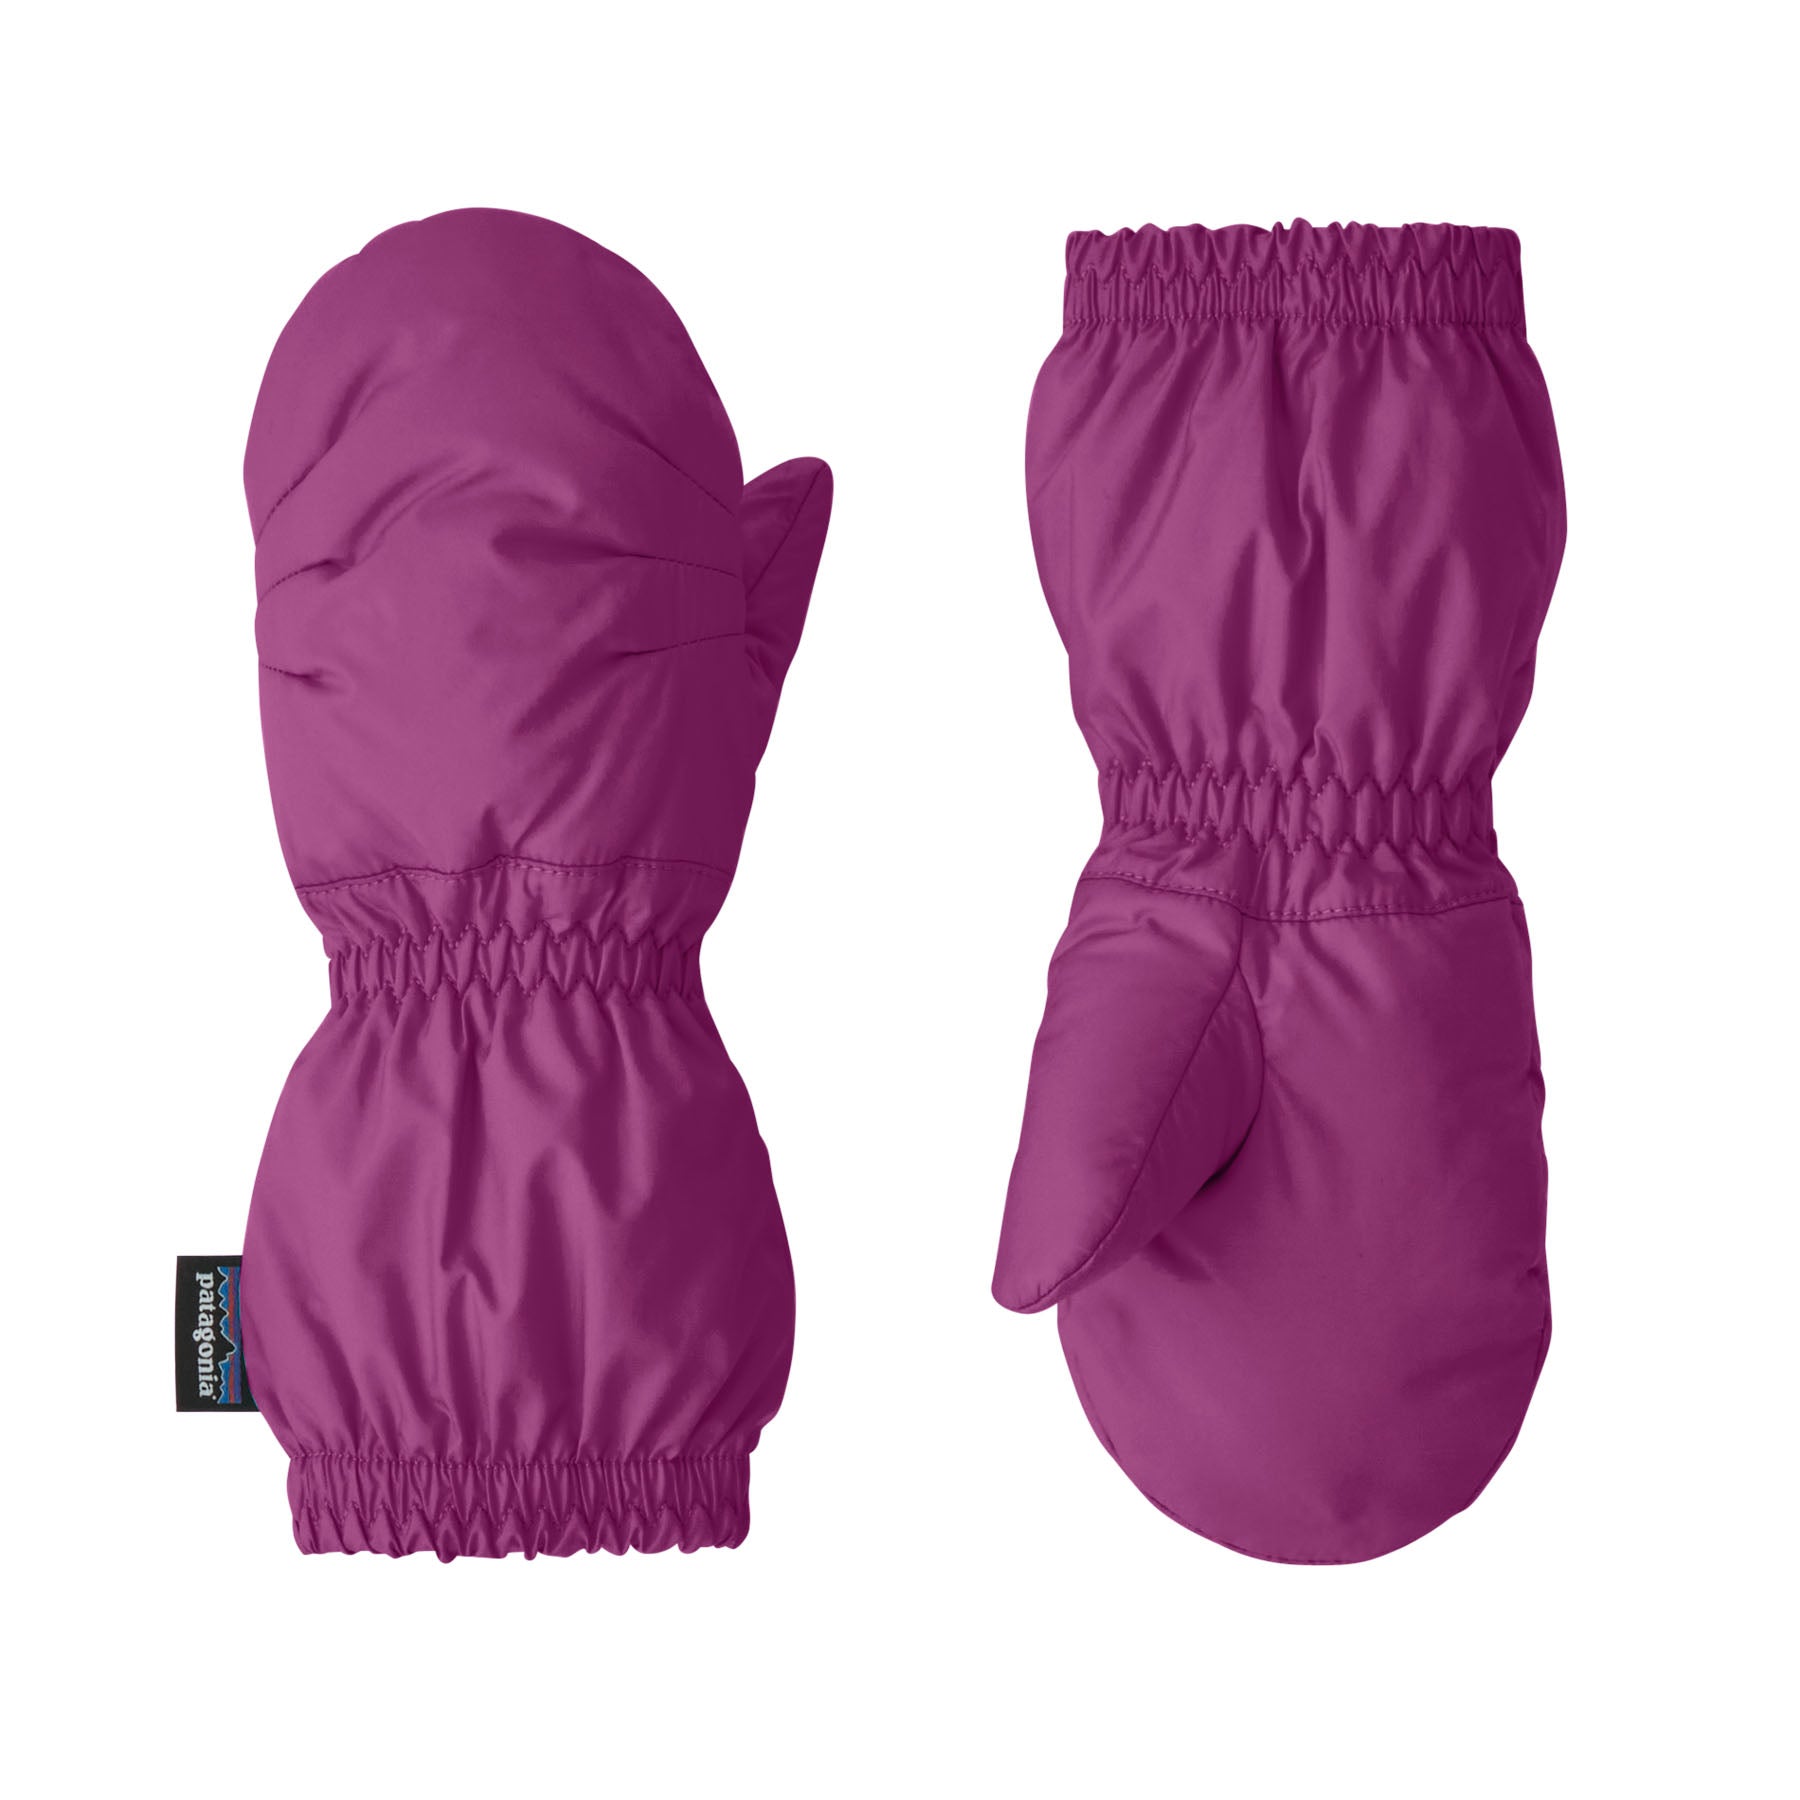 Patagonia Baby Puff Mitts - Fall 2022